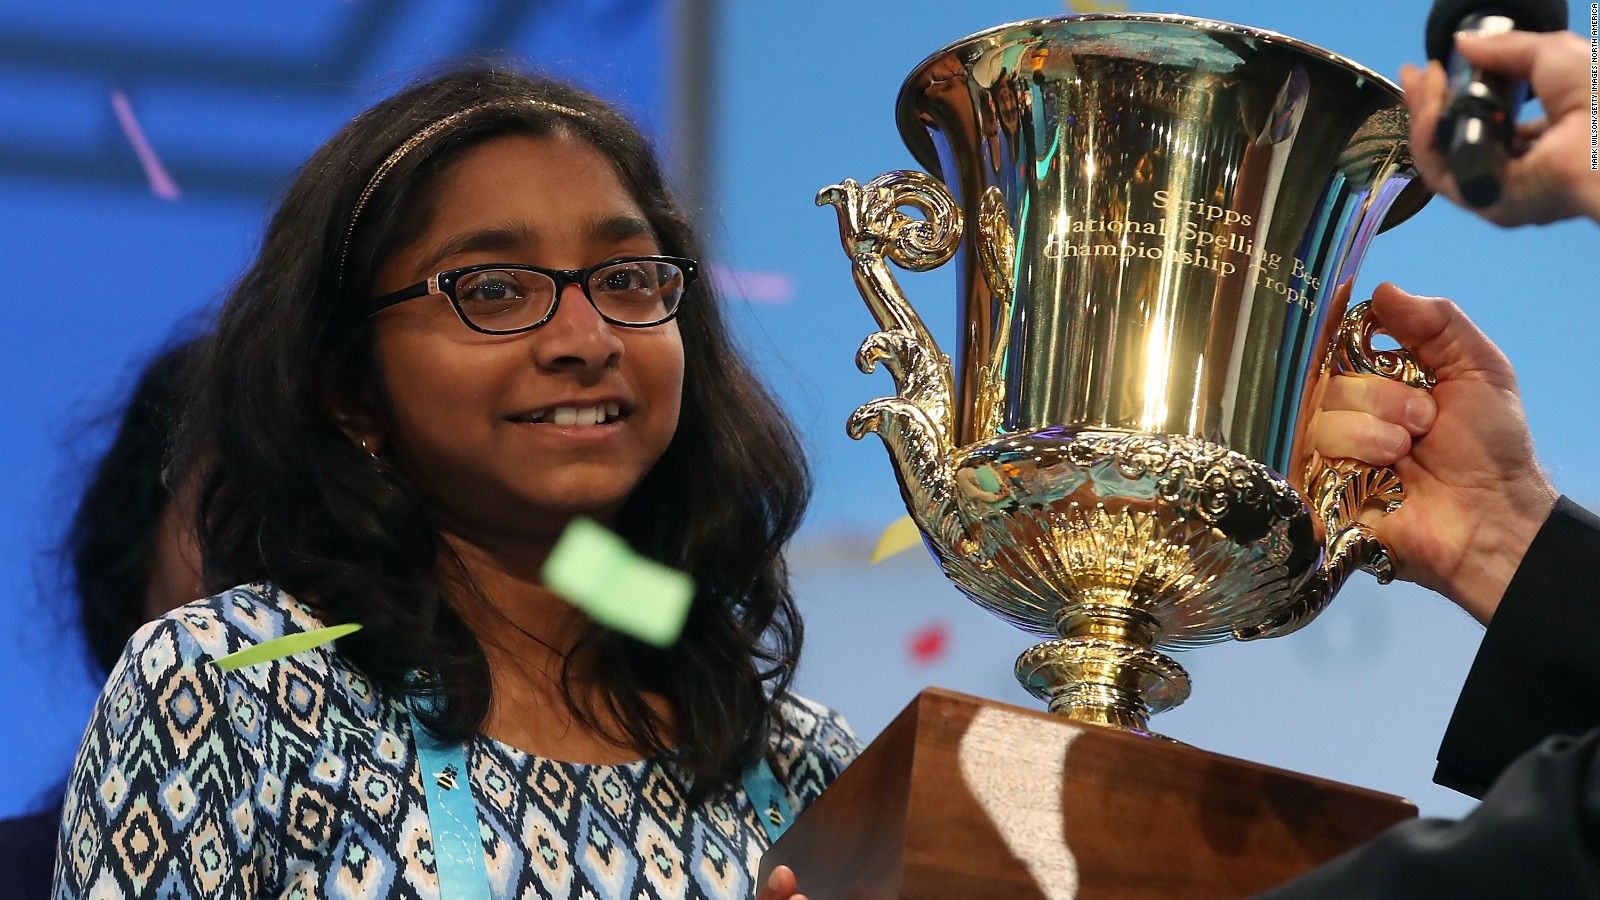 National Spelling Bee winner clinches title with 'marocain'